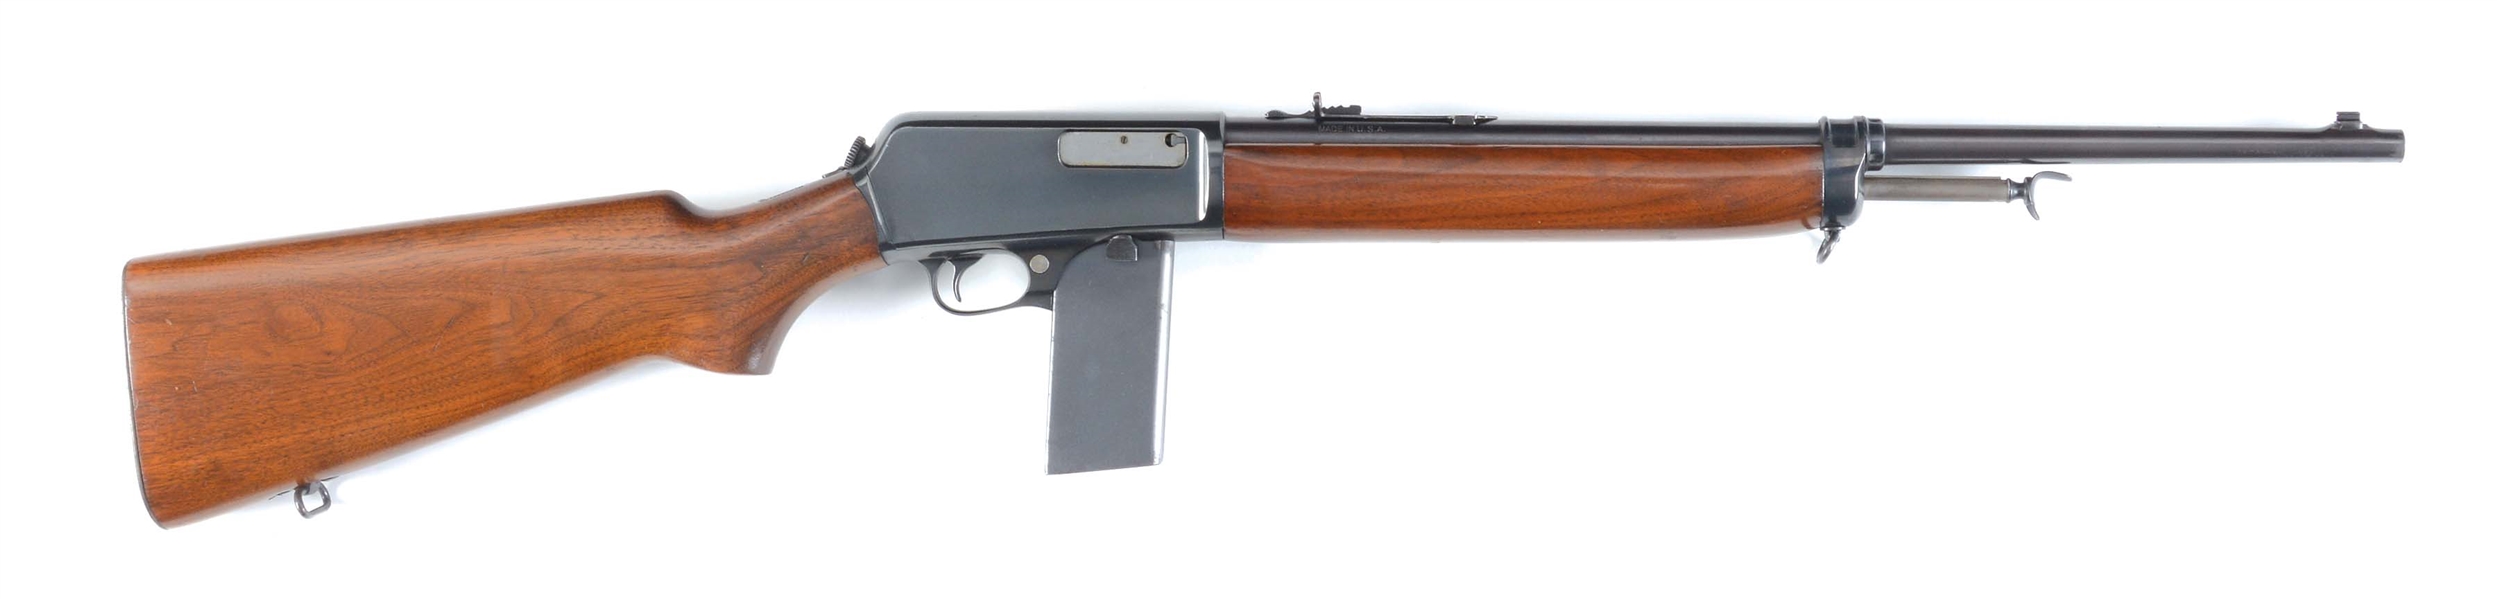 (C)FINE WINCHESTER MODEL 1907 .351 SELF-LOADING RIFLE WITH 10 ROUND MAGAZINE, MADE IN 1940.